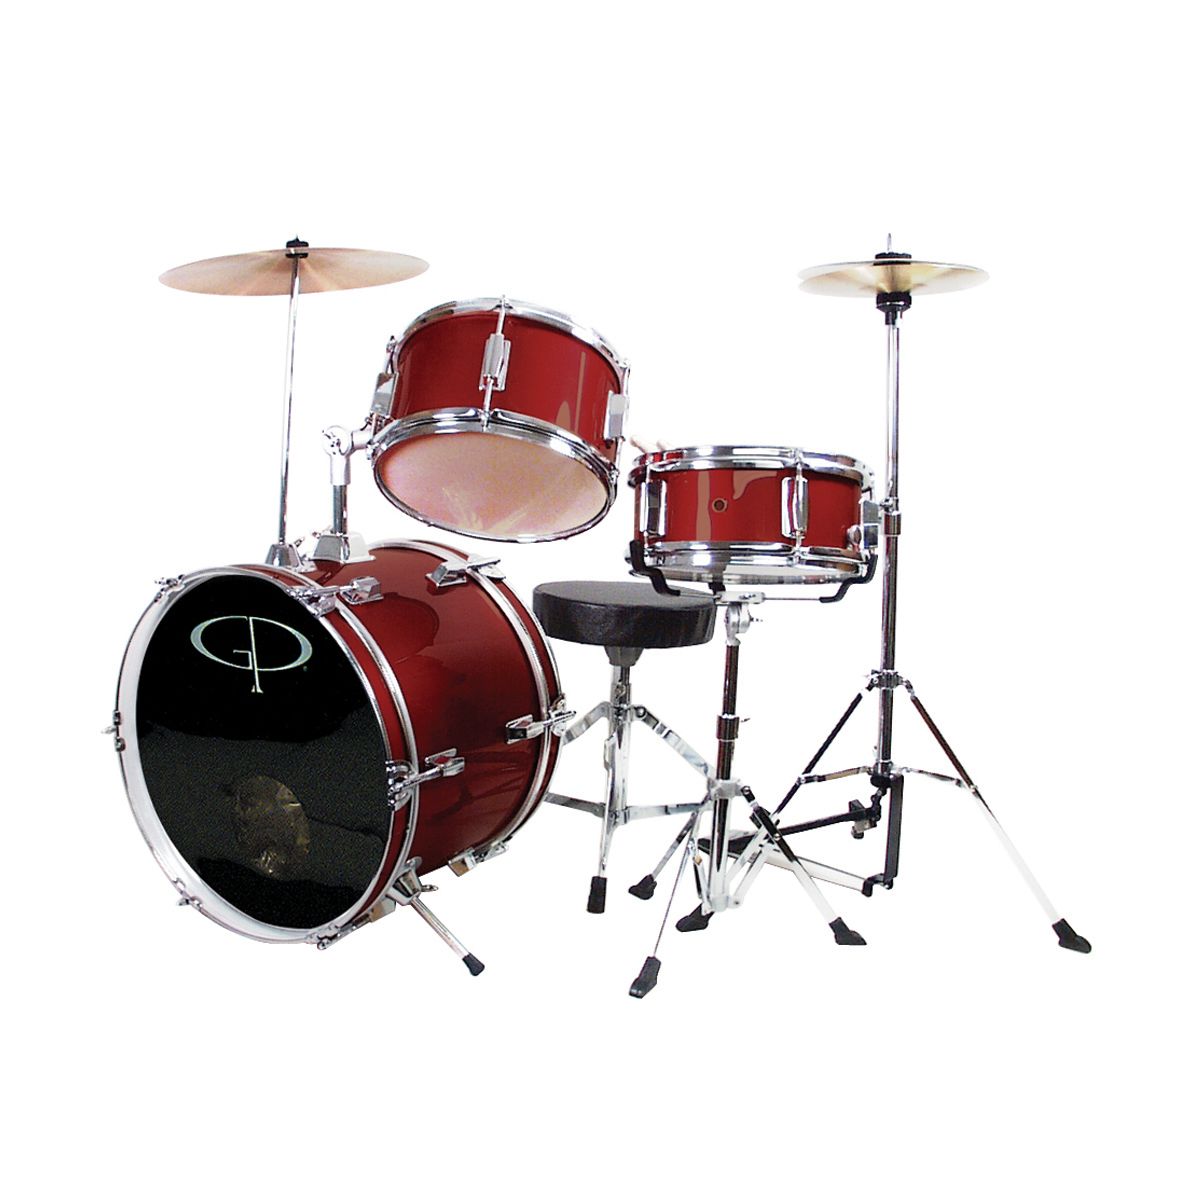 GP50 3-Piece Junior Drum Set With Cymbals and Throne in Wine Red